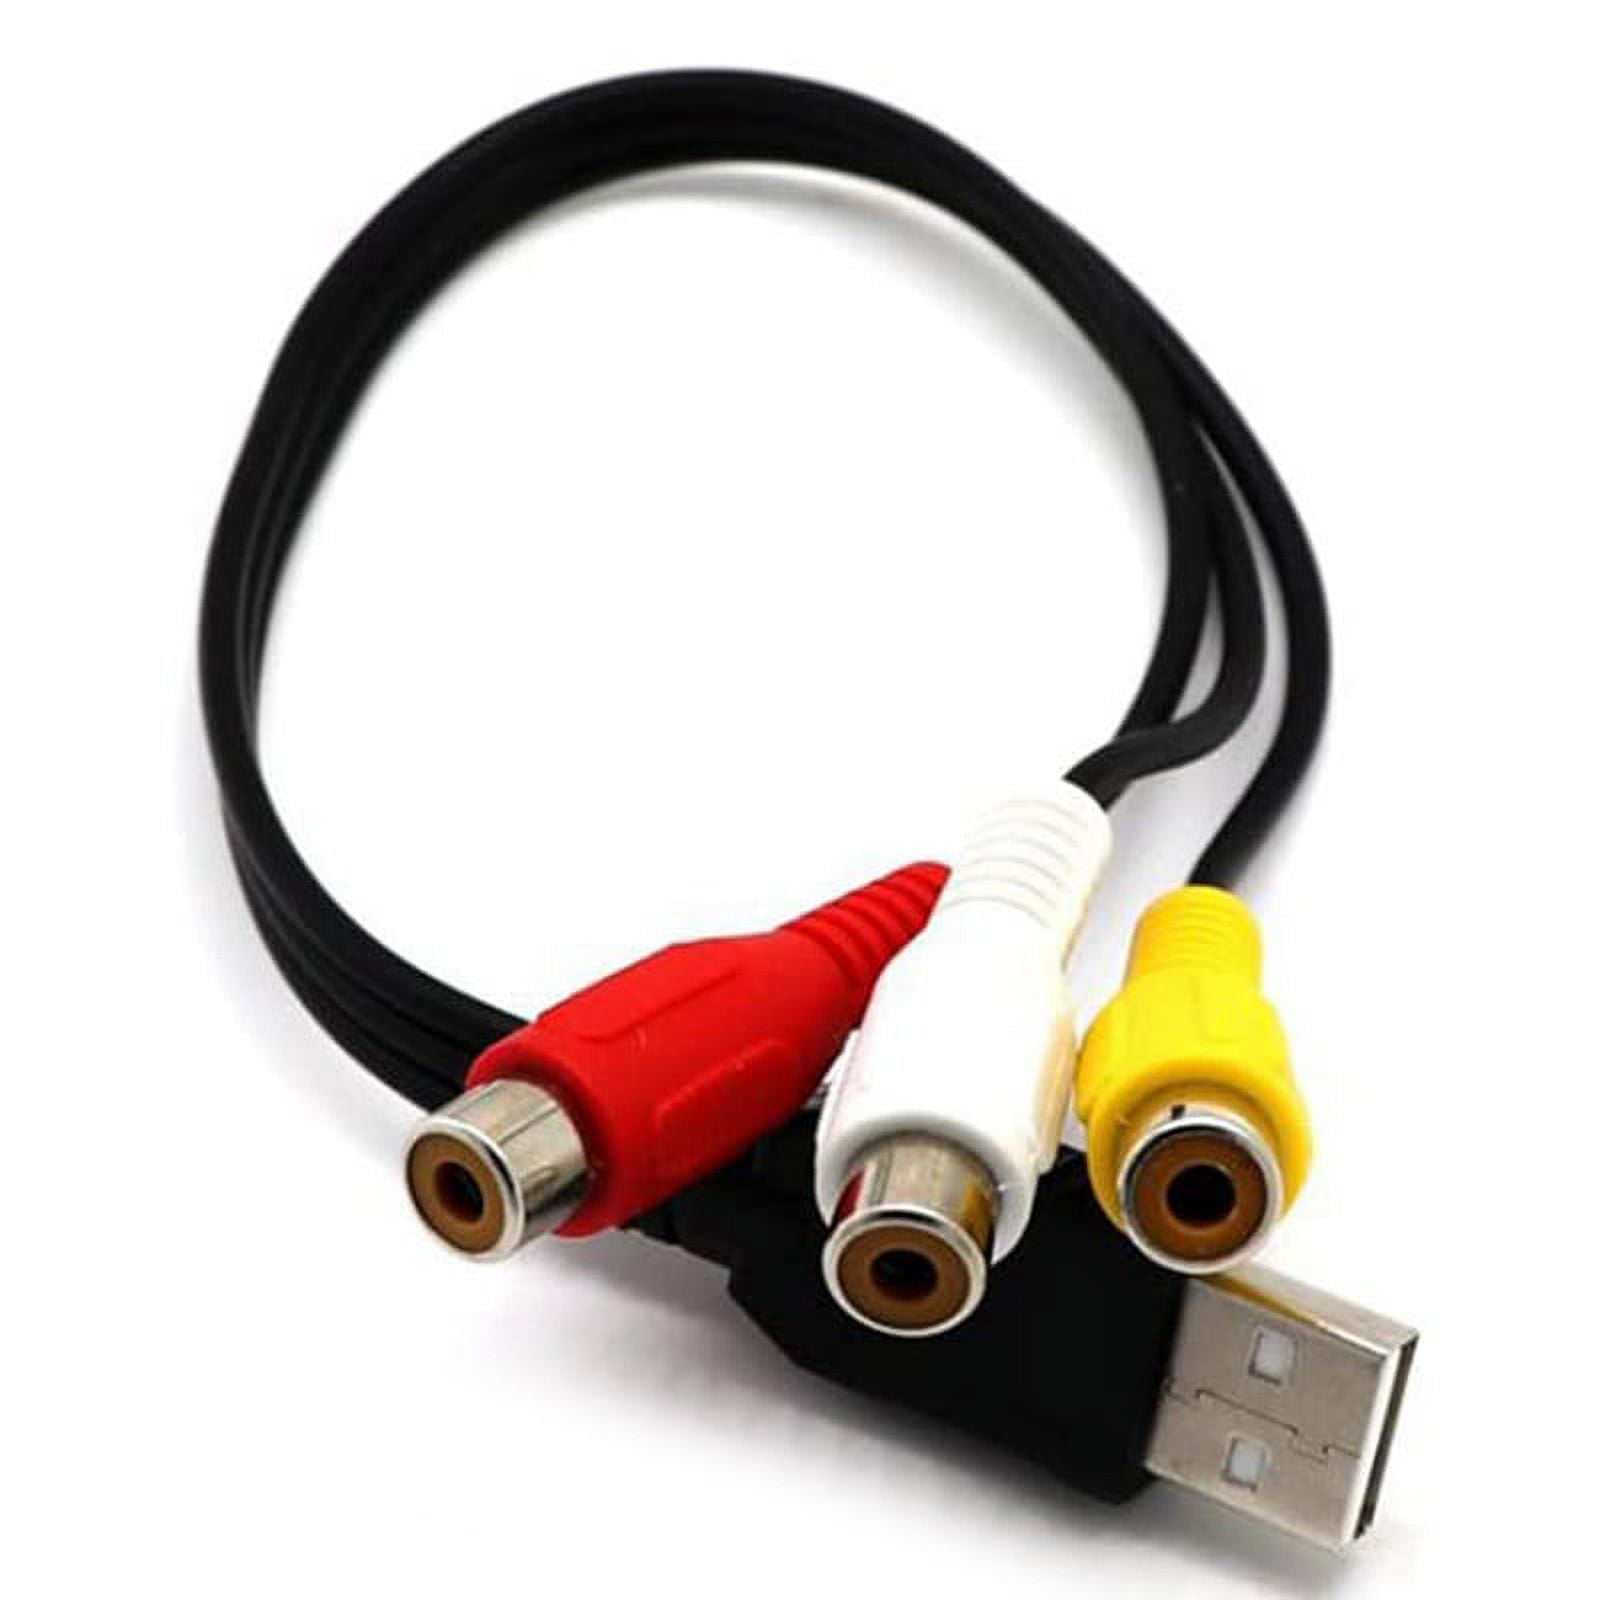 USB to RCA Cable,3 RCA to USB Cable,AV to USB, USB 2.0 Female to 3 RCA Male  Video A/V Camcorder Adapter Cable for TV/Mac/PC 5feet/1.5M